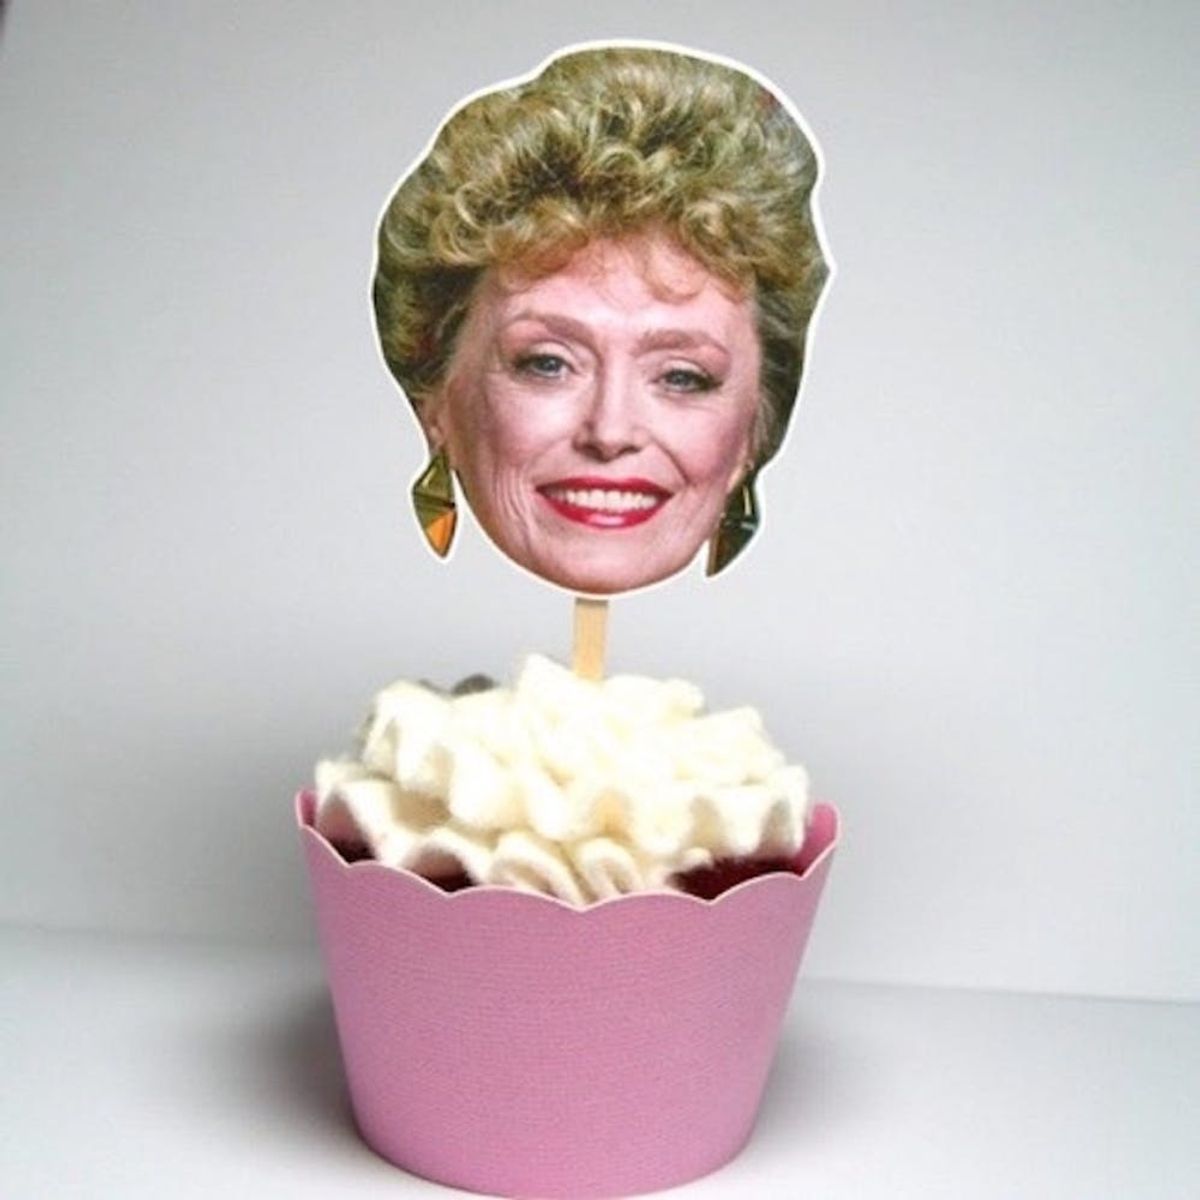 19 Ways to Throw the Best Golden Girls Viewing Party